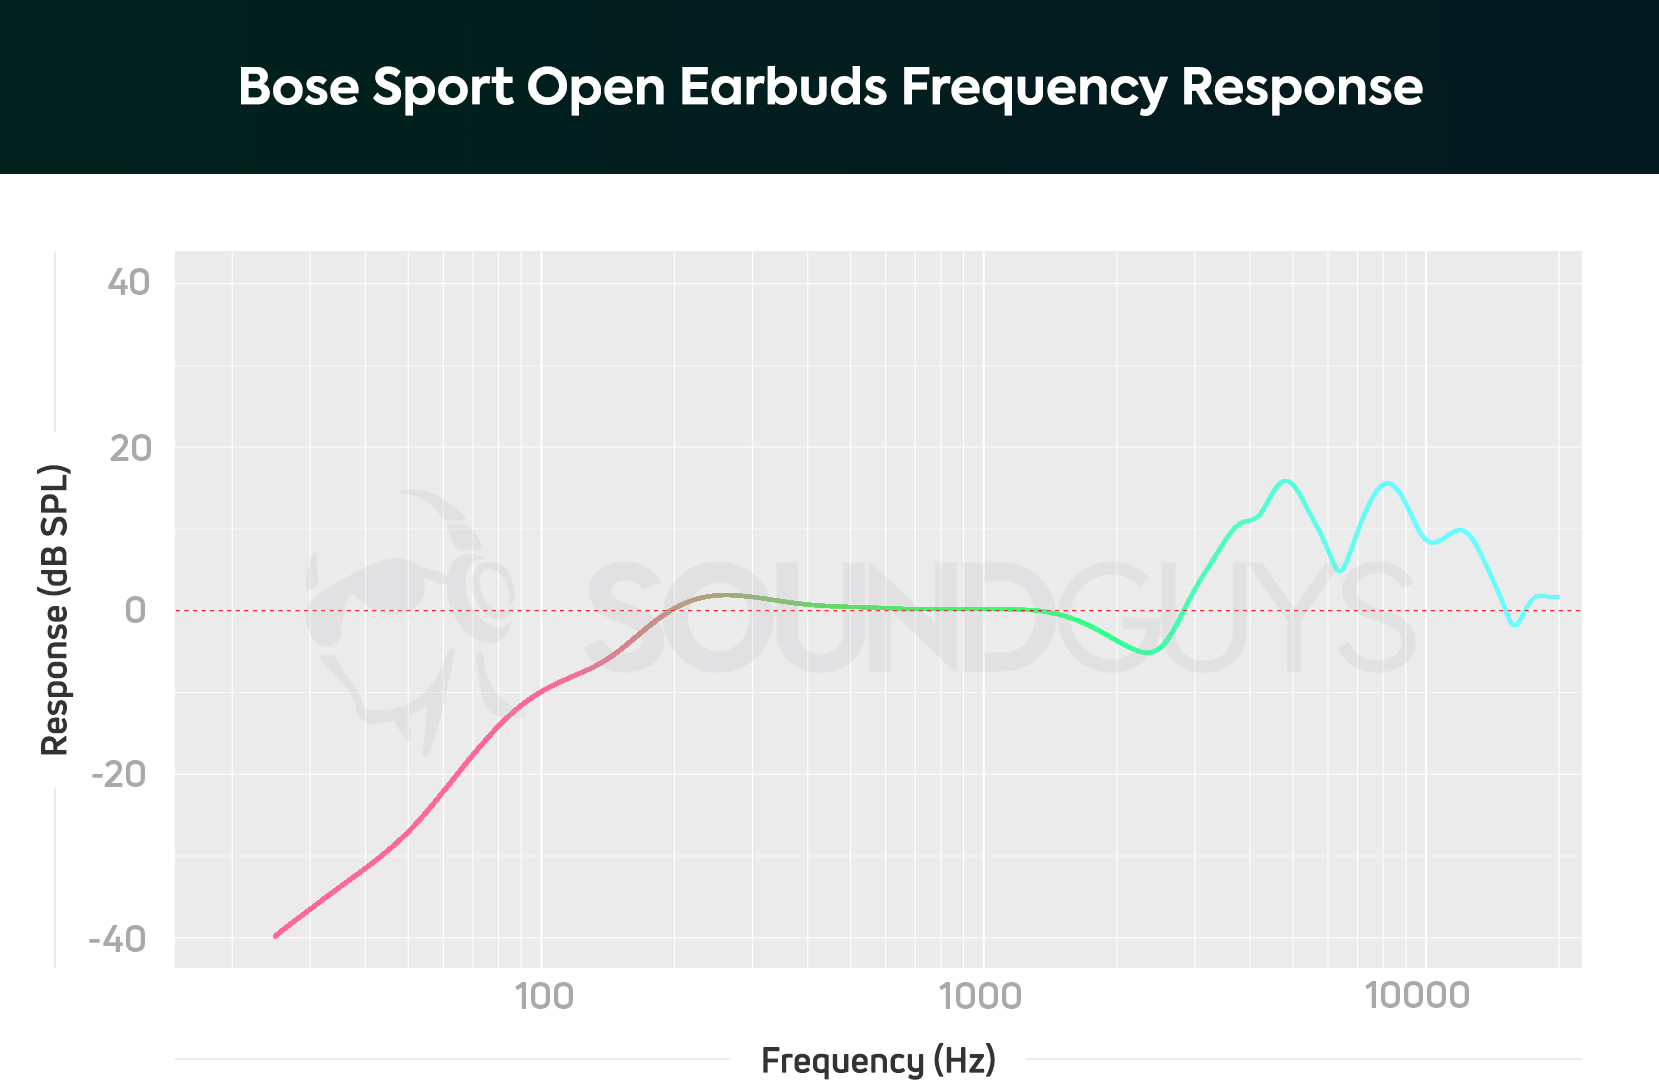 A chart depicts the Bose Sport Open Earbuds frequency response with attenuated bass notes, accurate mids, and amplified treble notes.